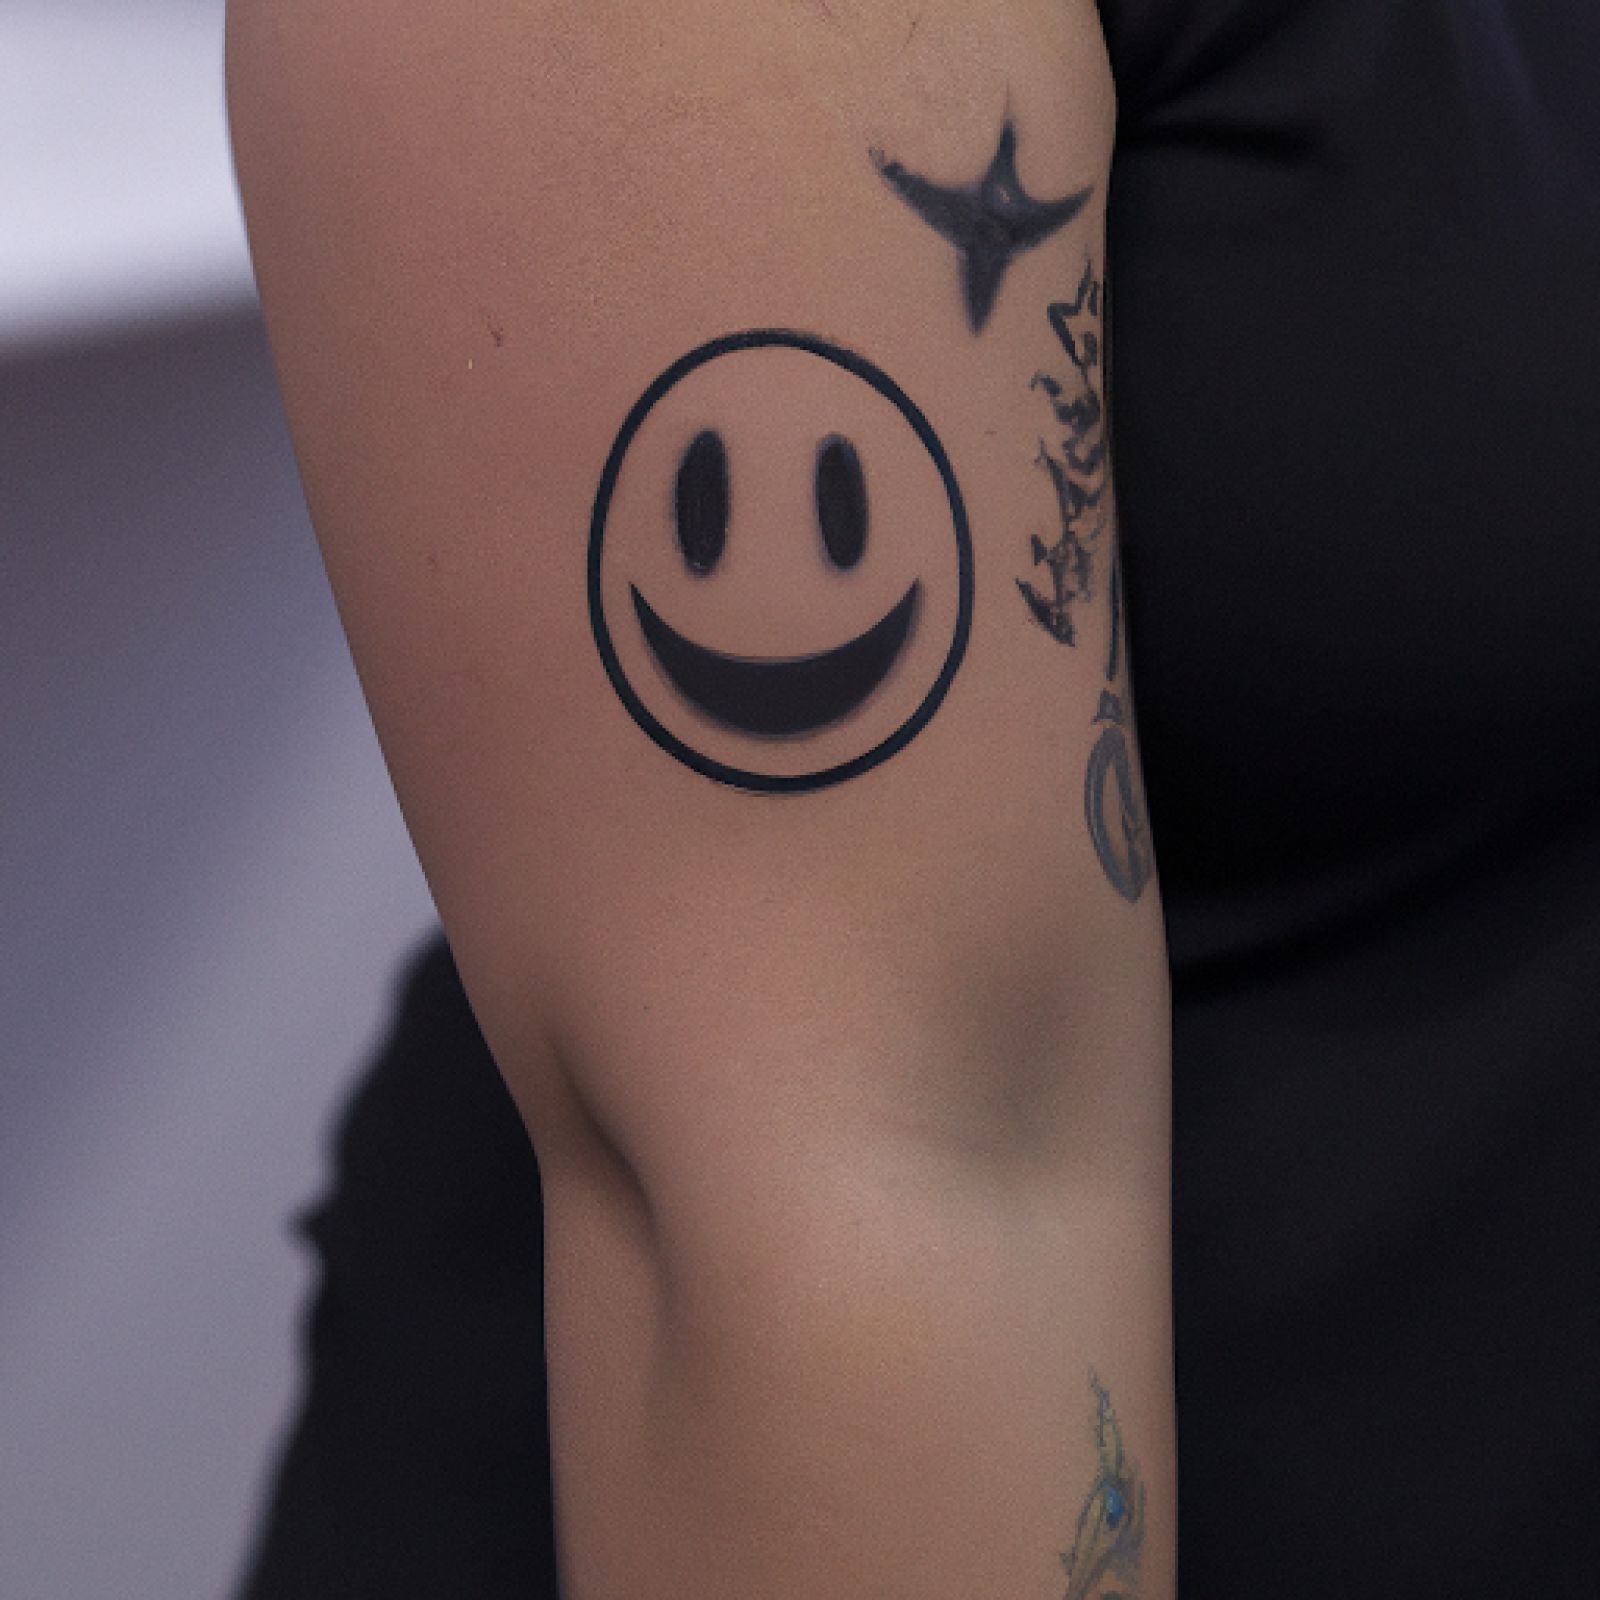 Smiley tattoo on sleeve for women